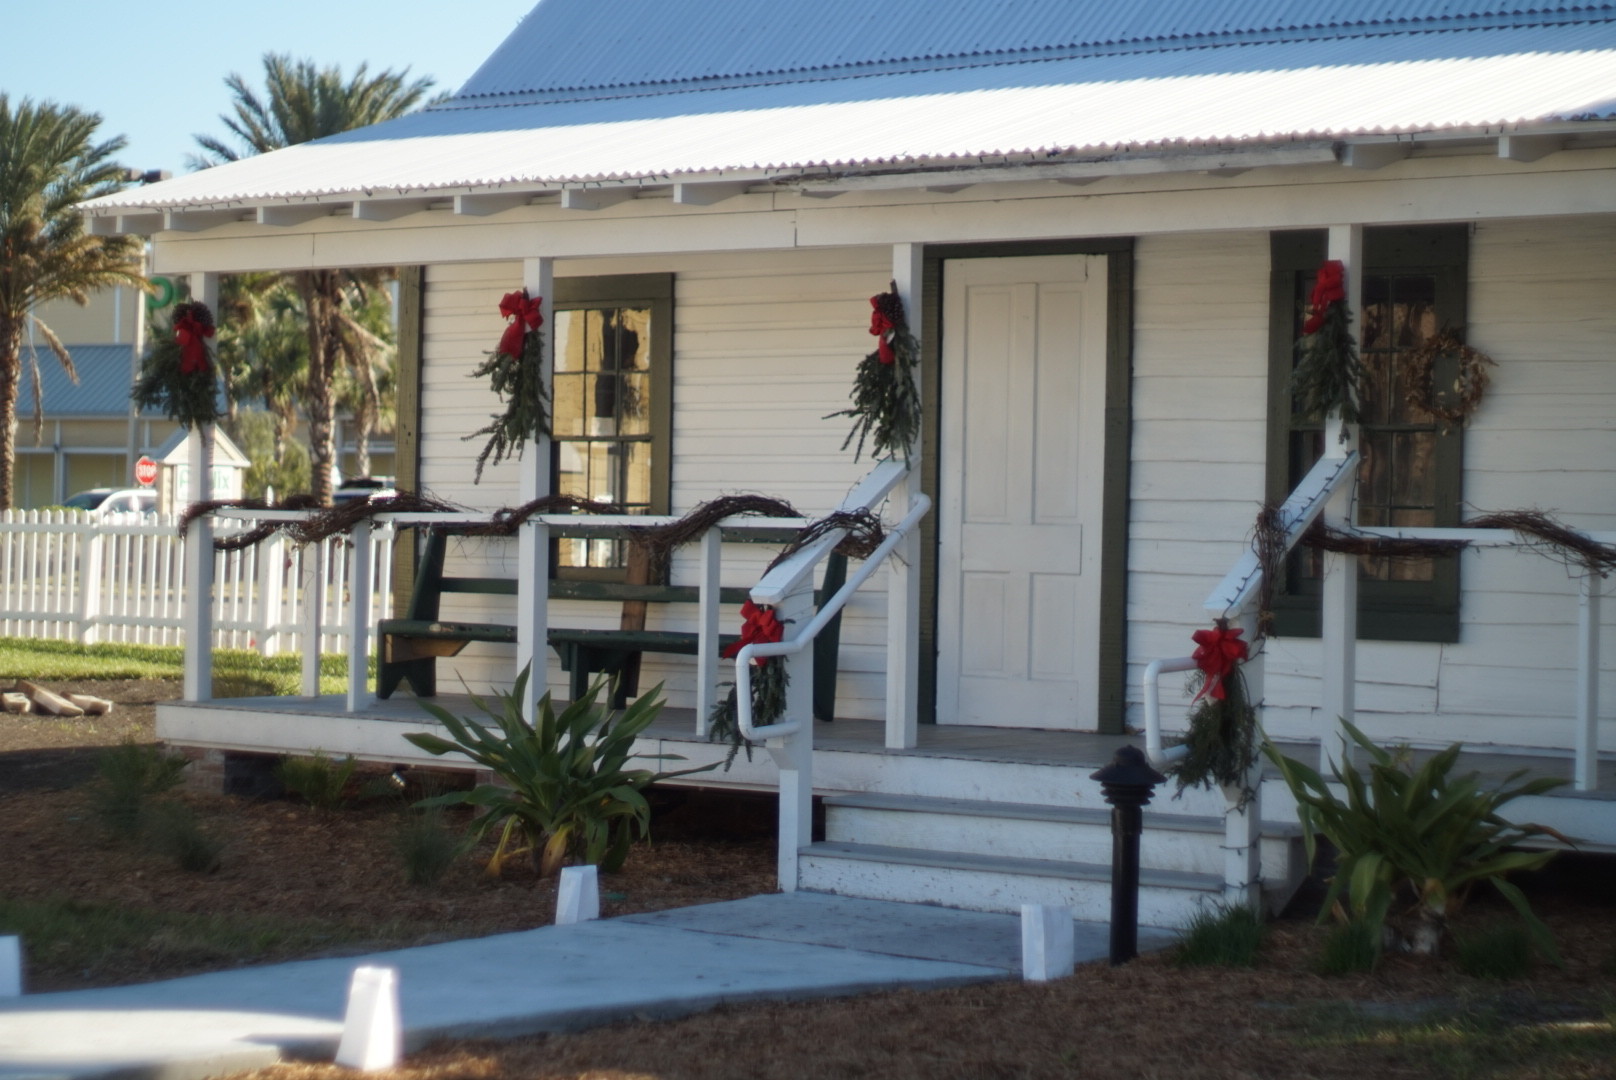 The newly unveiled Oesterreicher-McCormick Homestead receives festive treatment with Christmas trimmings